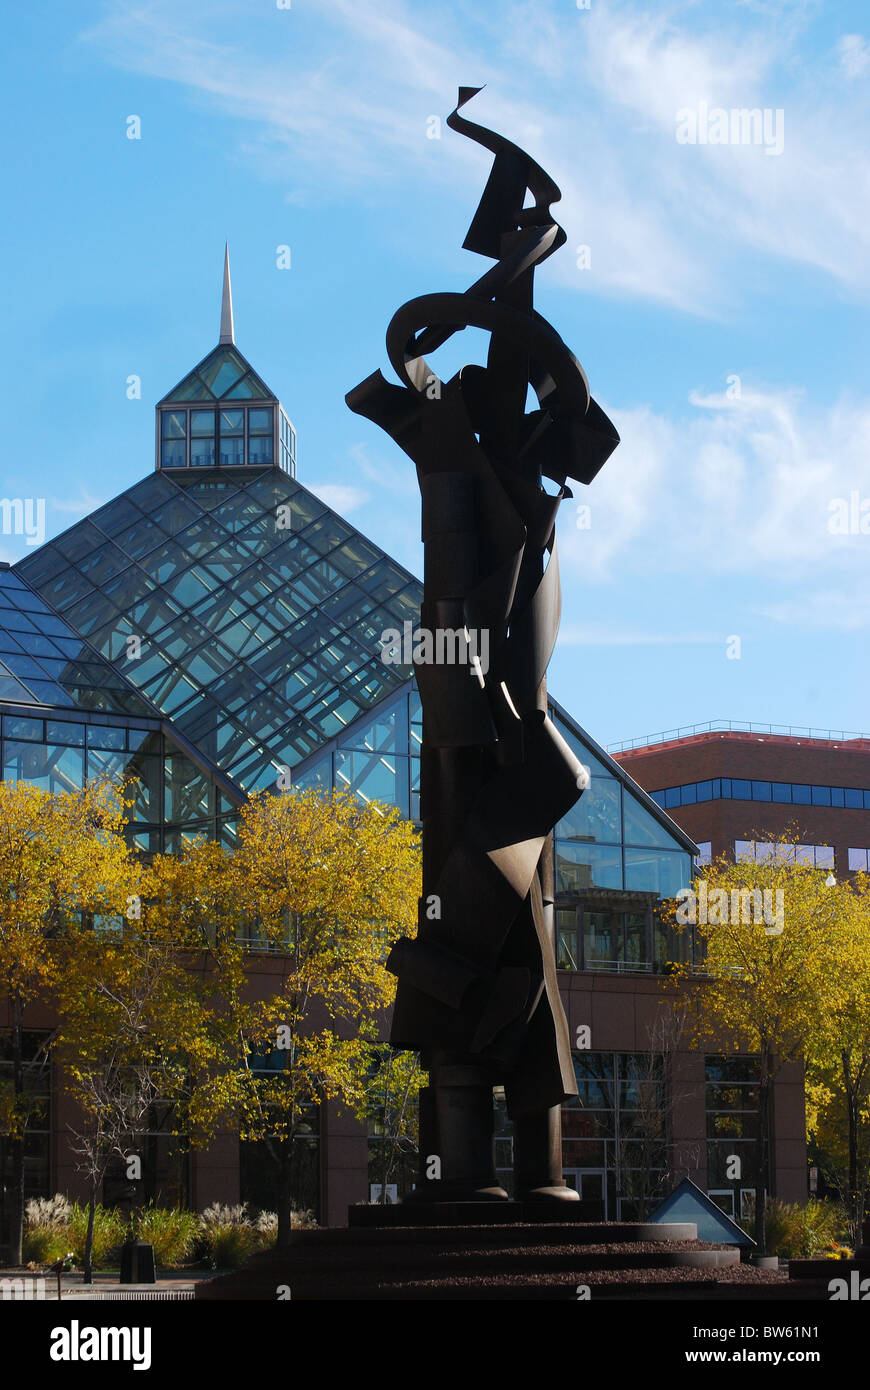 Paley's sculpture in front of  One Bausch & Lomb Place Rochester, NY Stock Photo